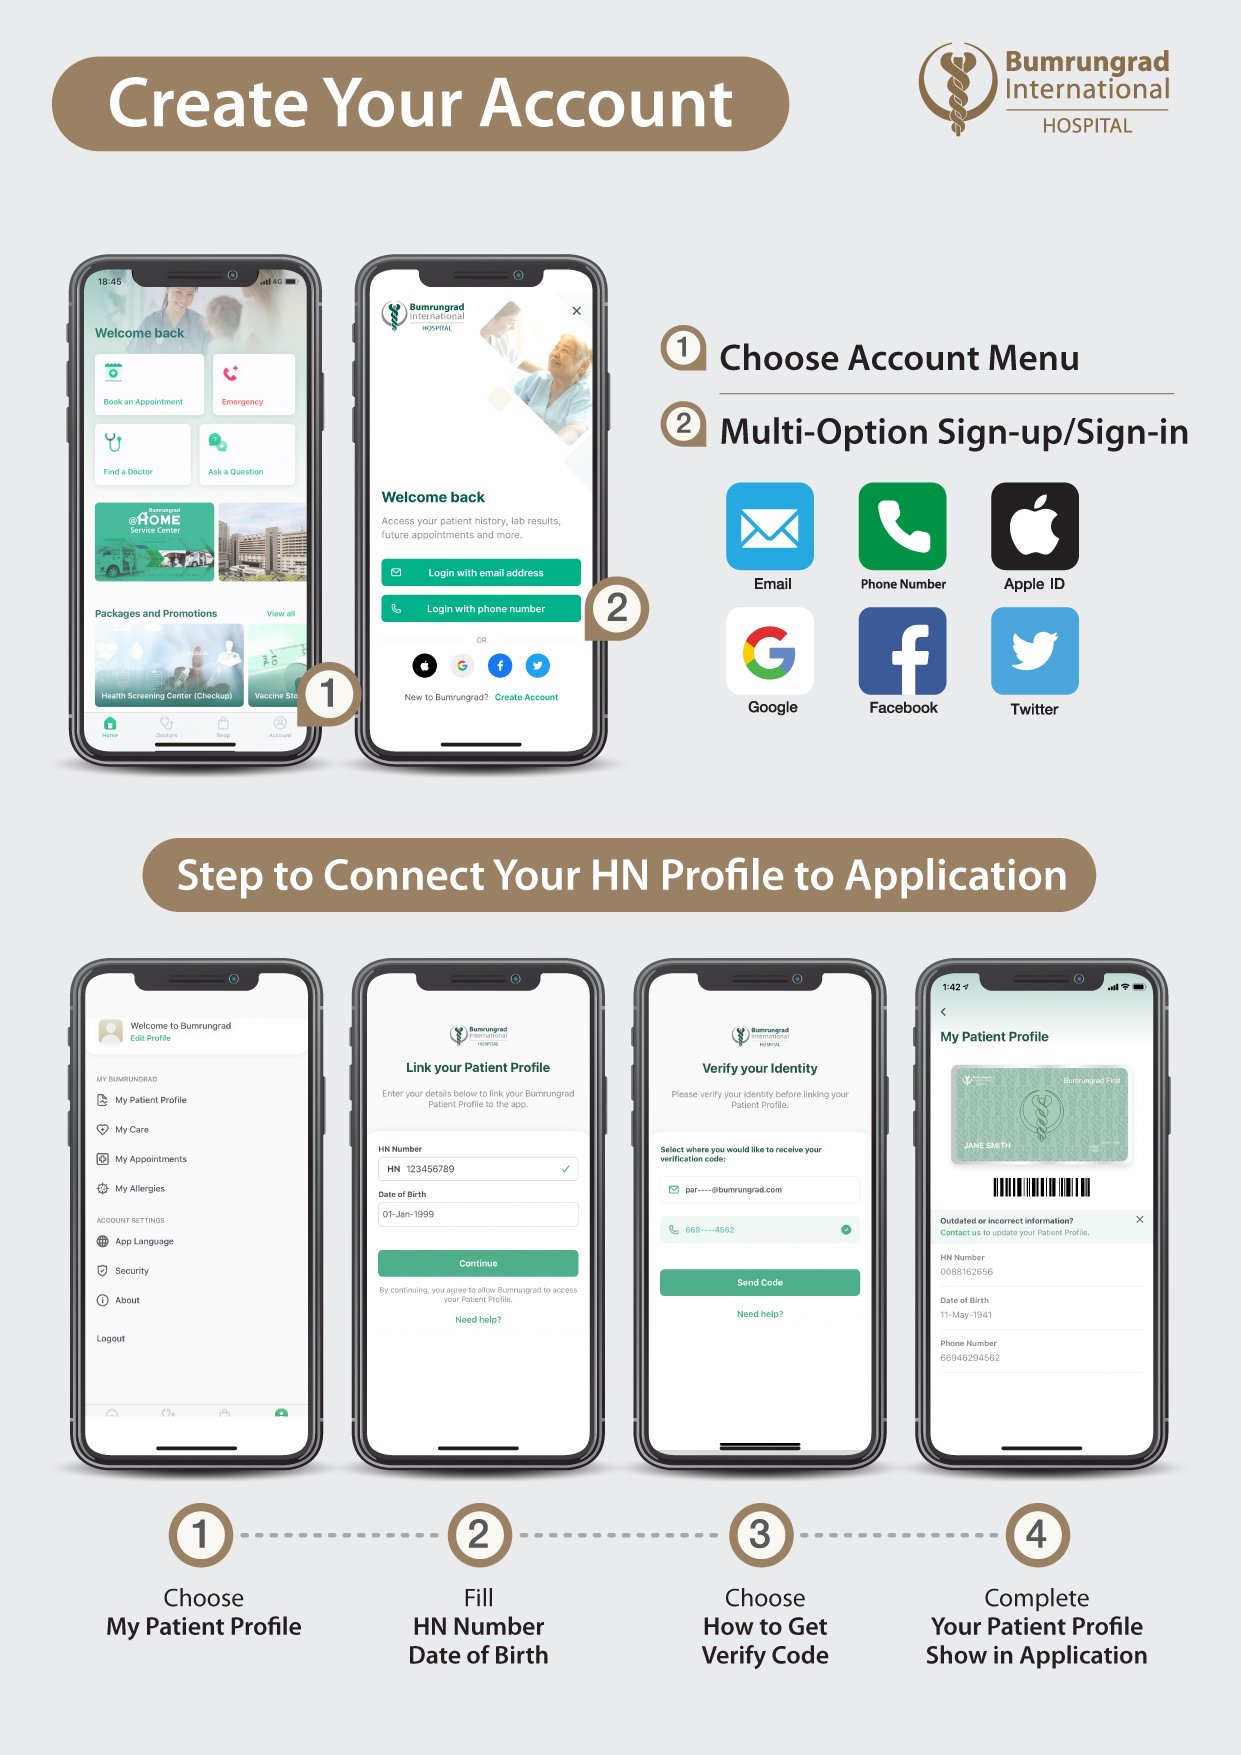 HOW TO CONNECT YOUR PROFILE TO APPLICATION